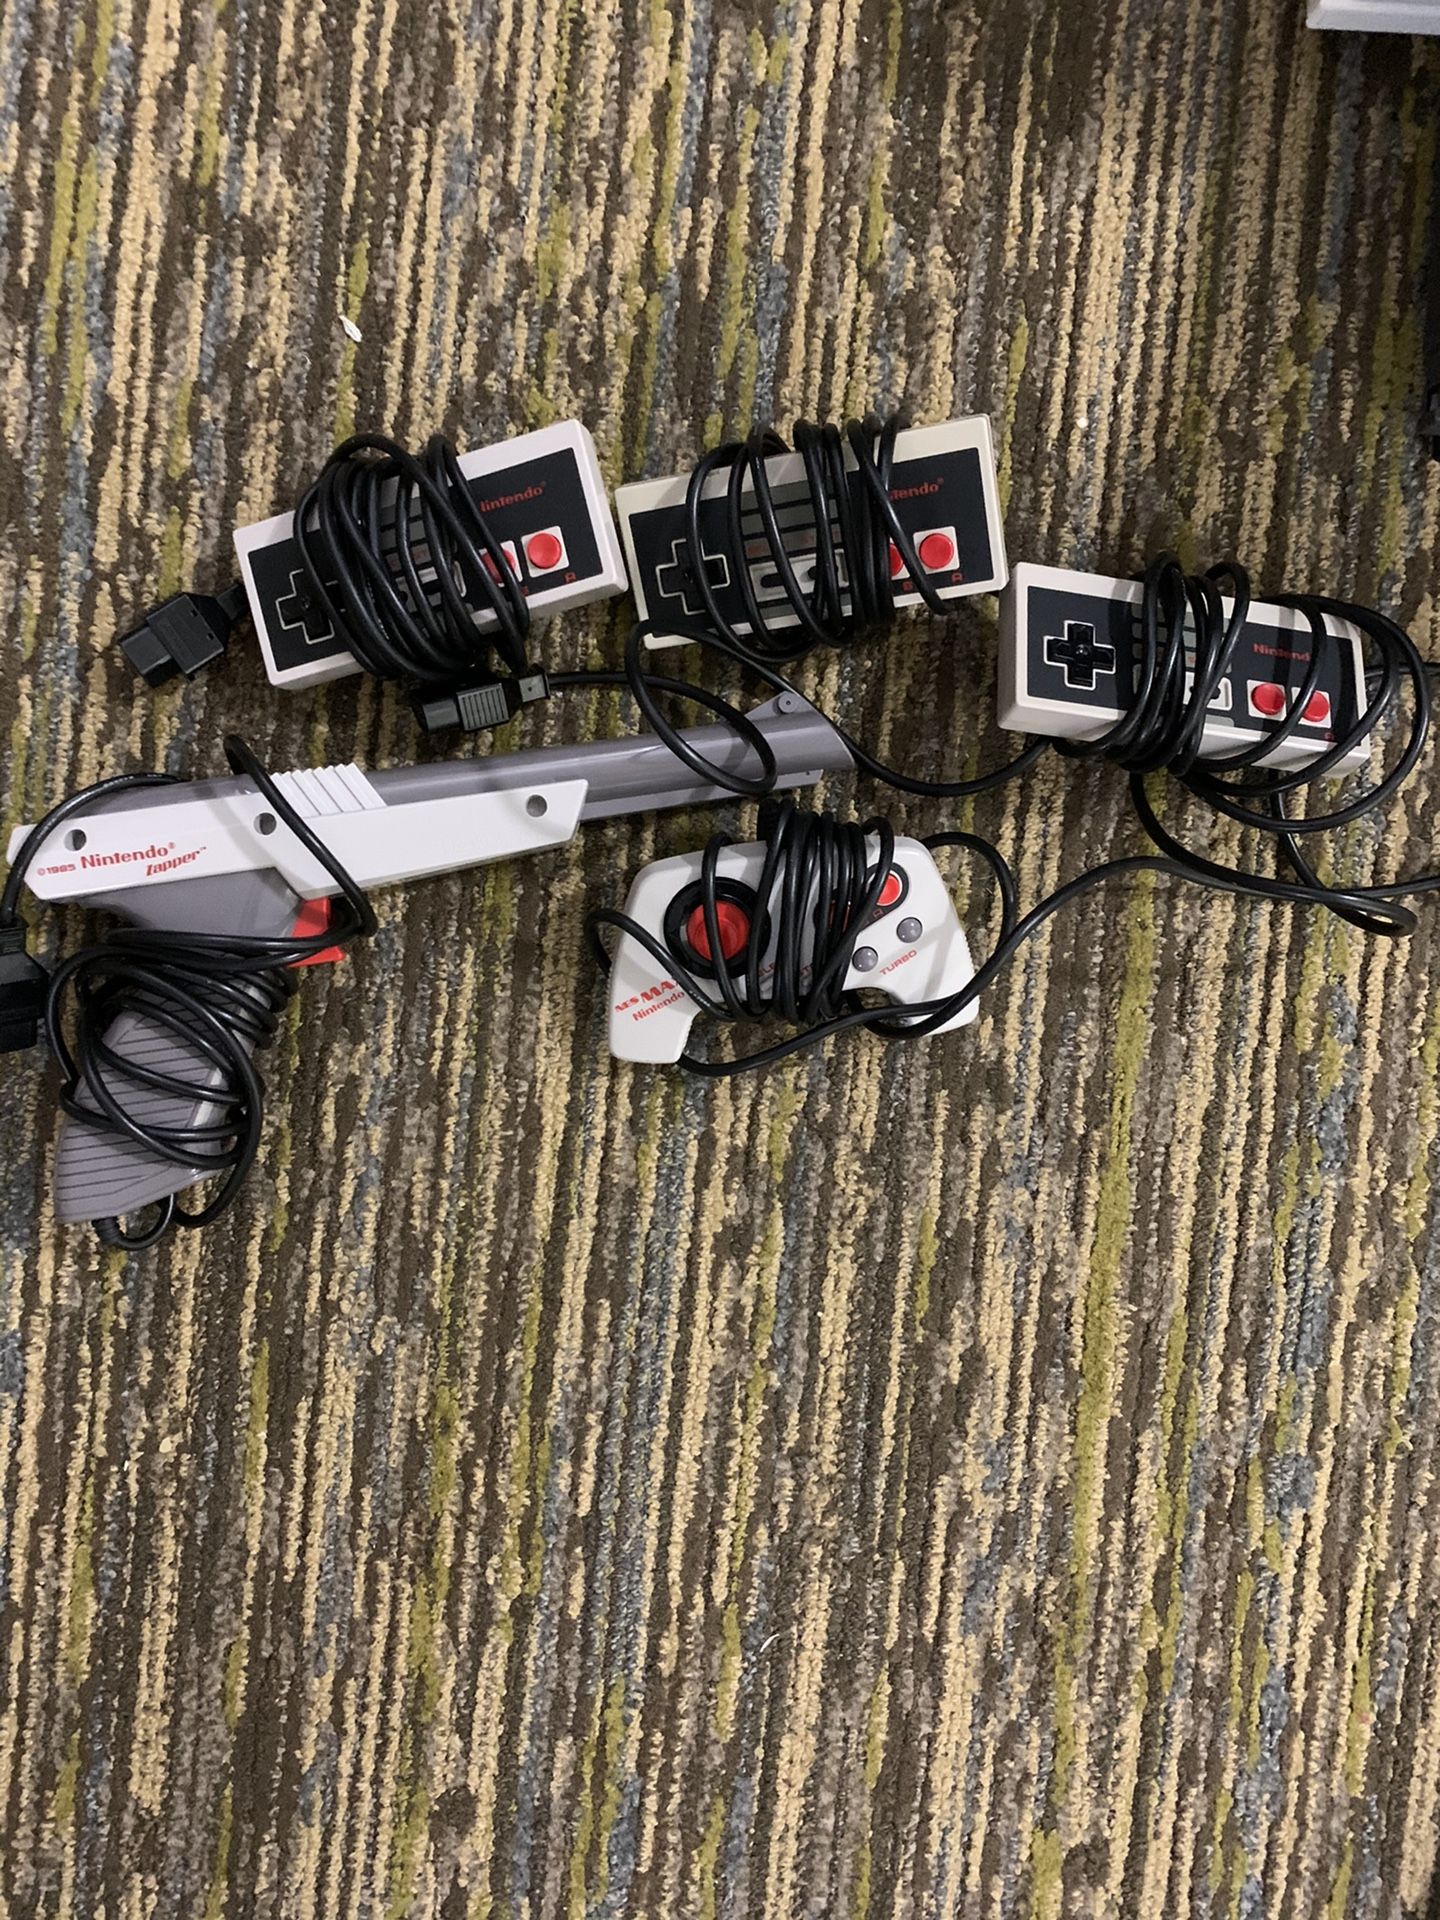 NES controllers Lot